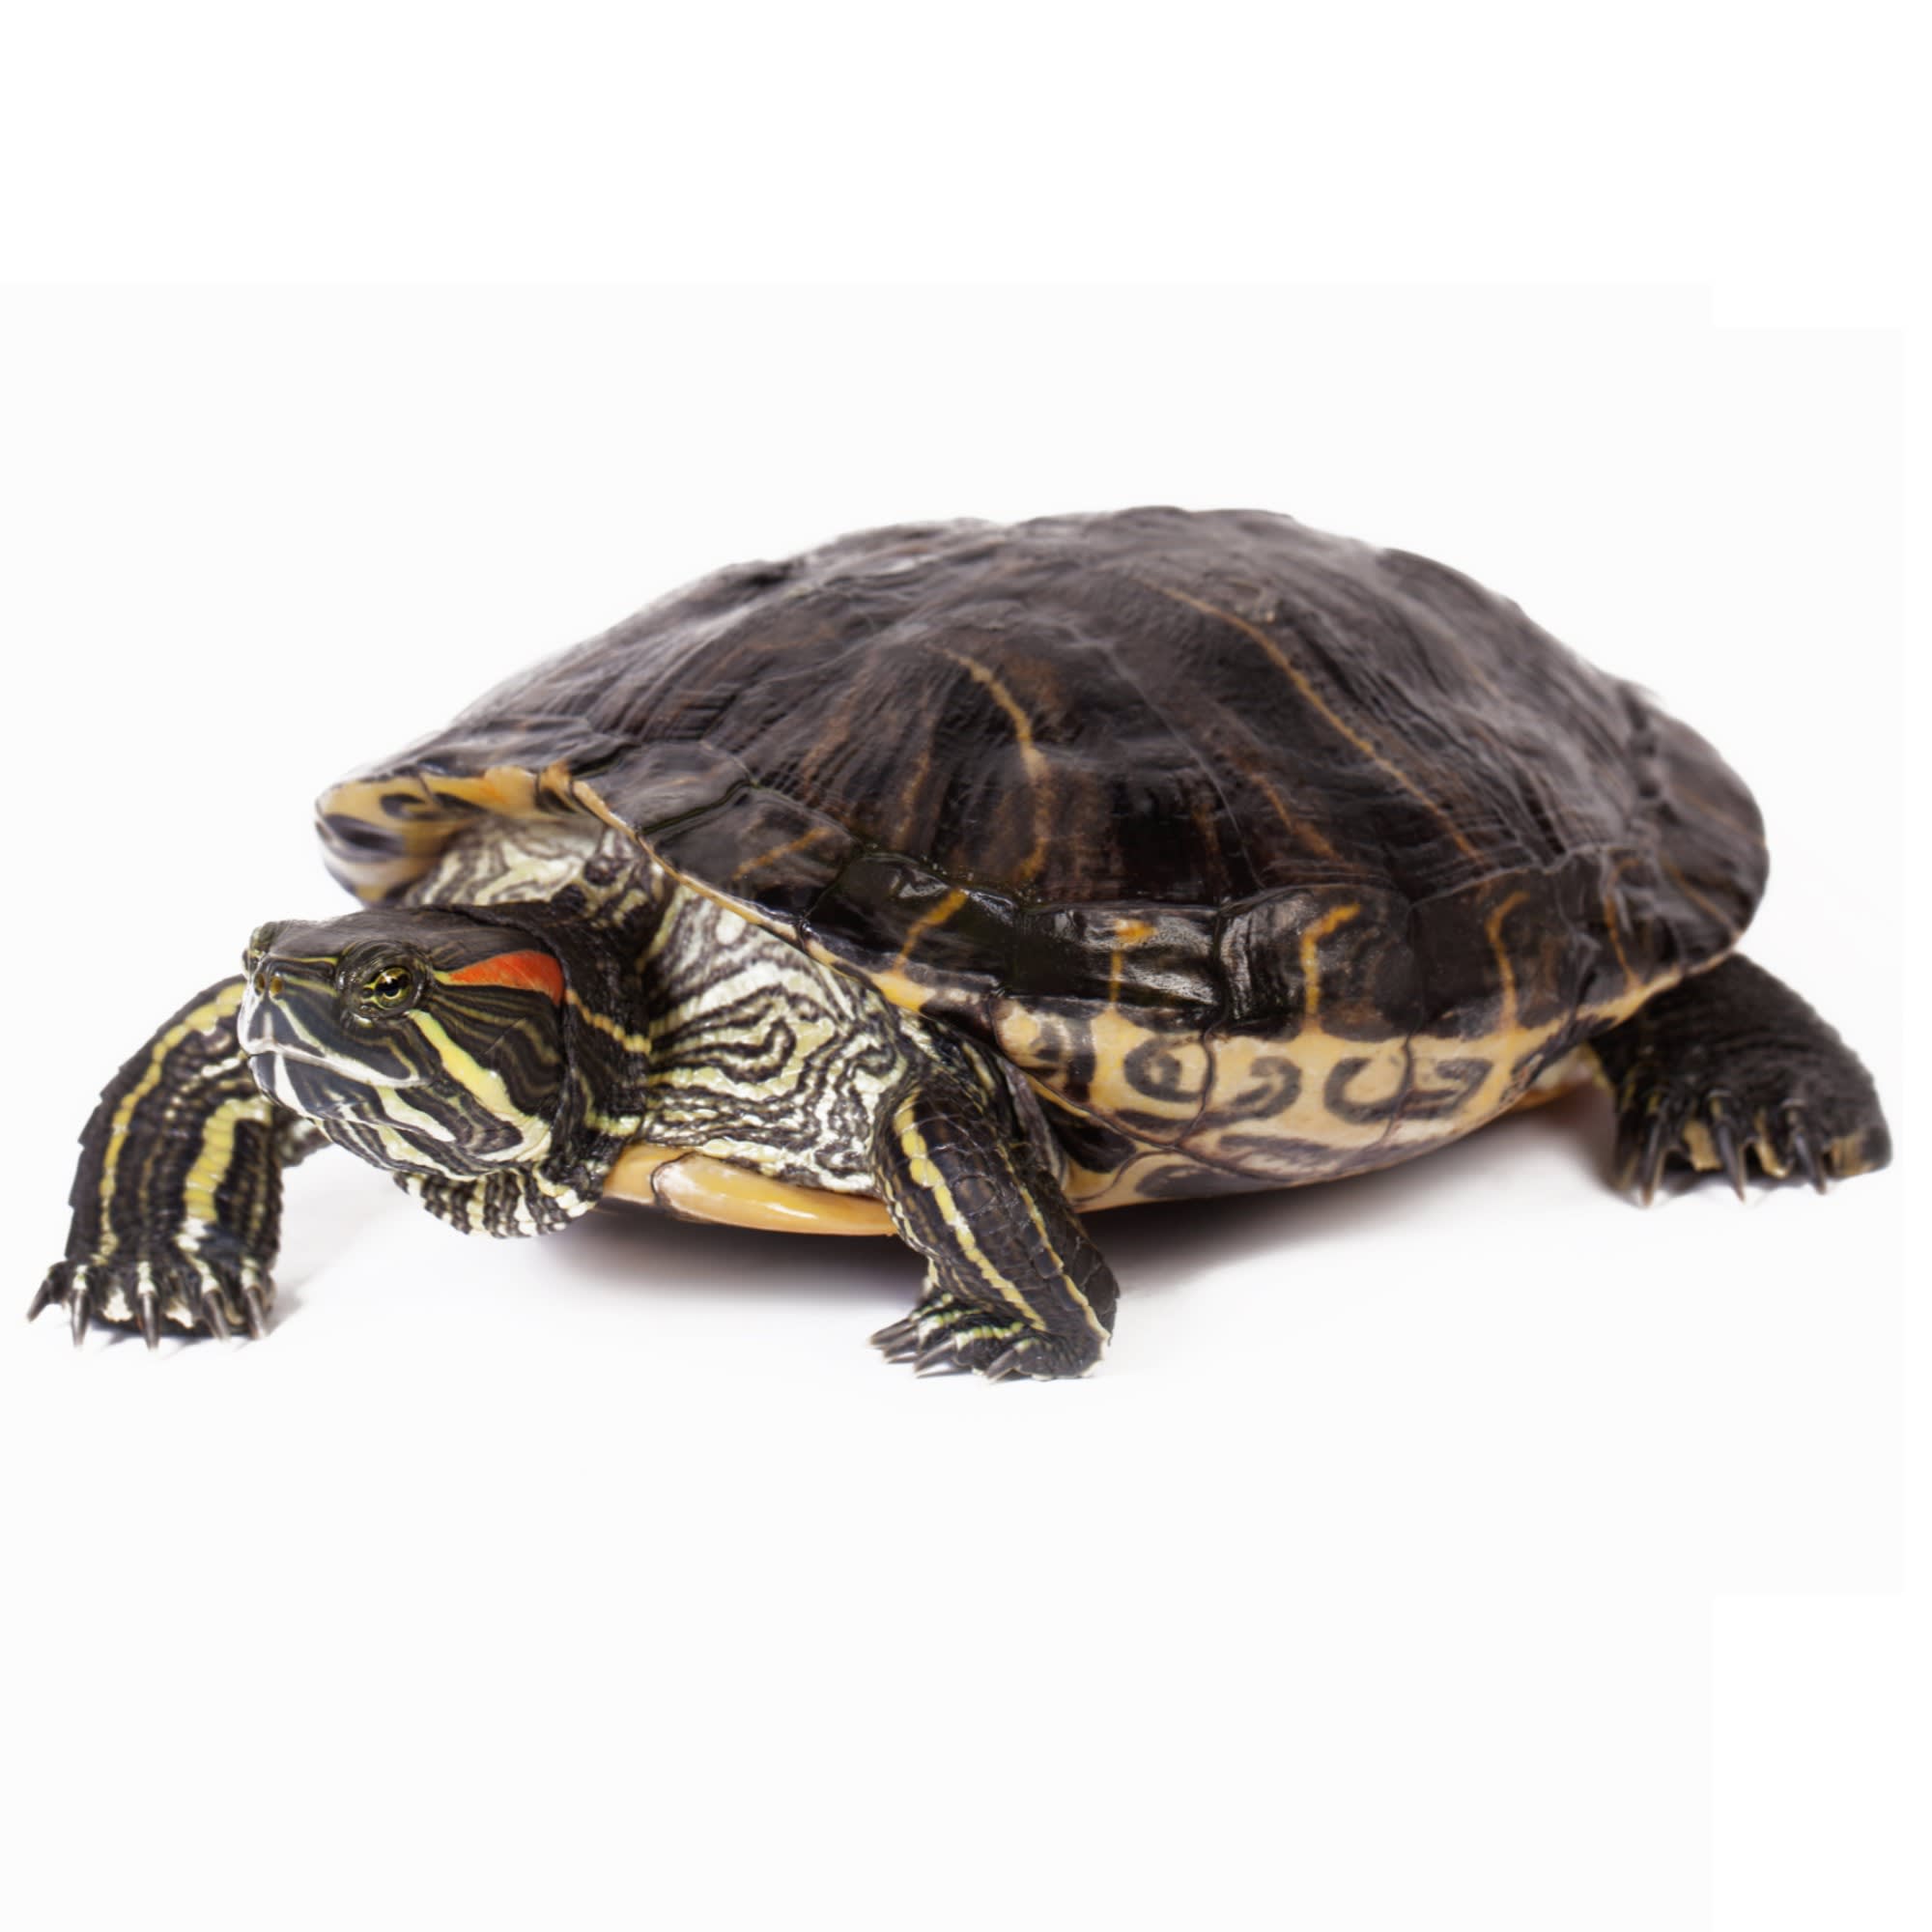 Red Eared Slider Turtles | Red Eared Slider for Sale | Petco